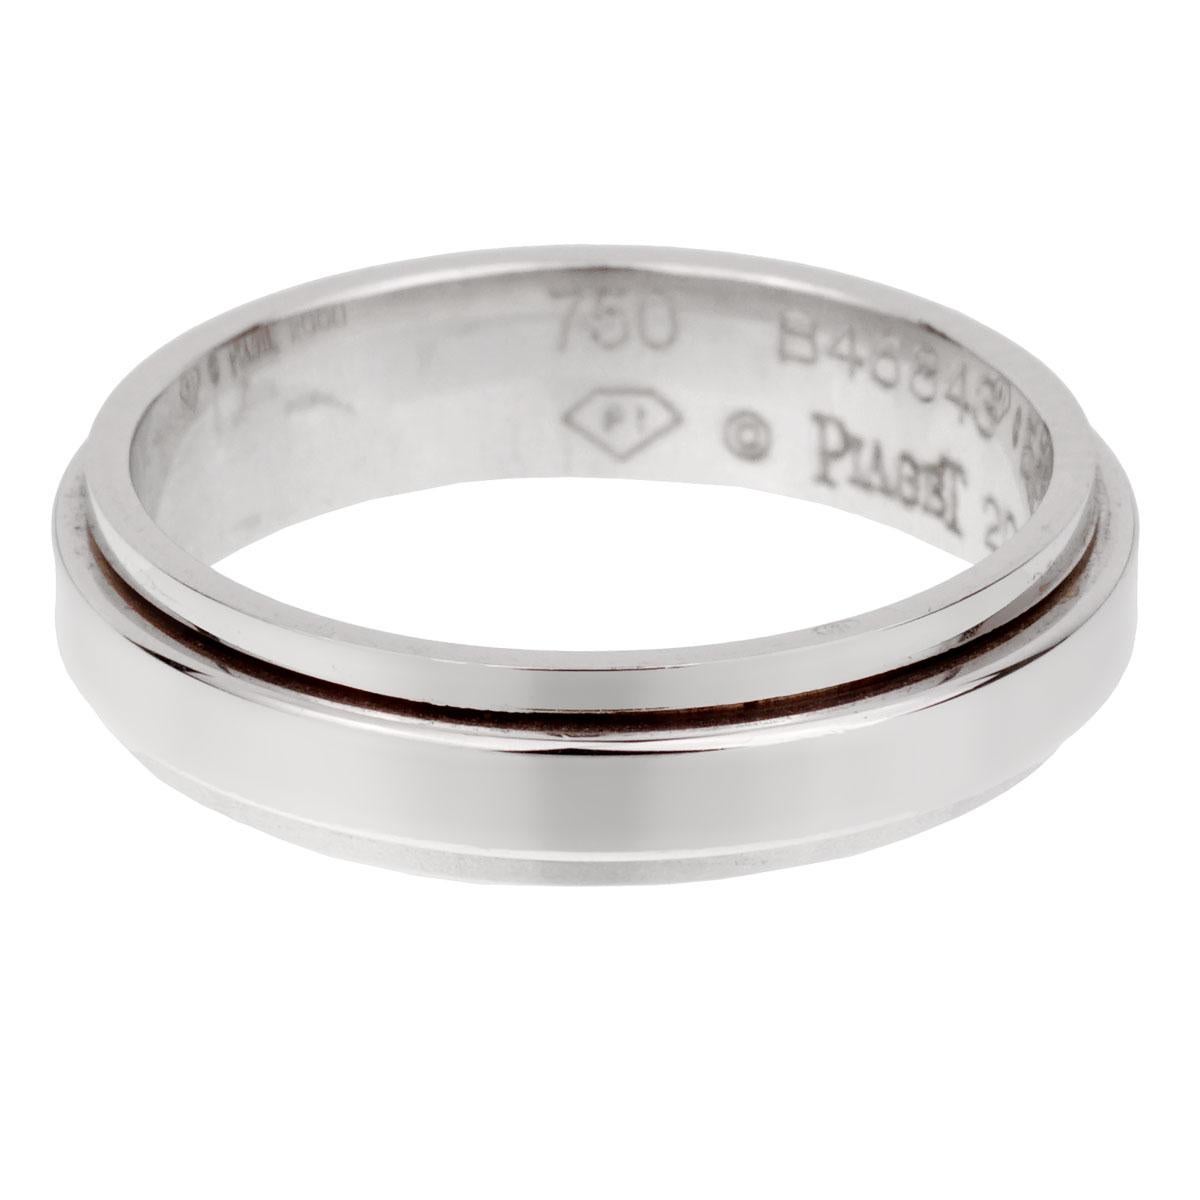 A chic band style ring by Piaget from the Possession collection featuring a spinning center band in 18k white gold. The ring measures a size 7

Sku: 1921